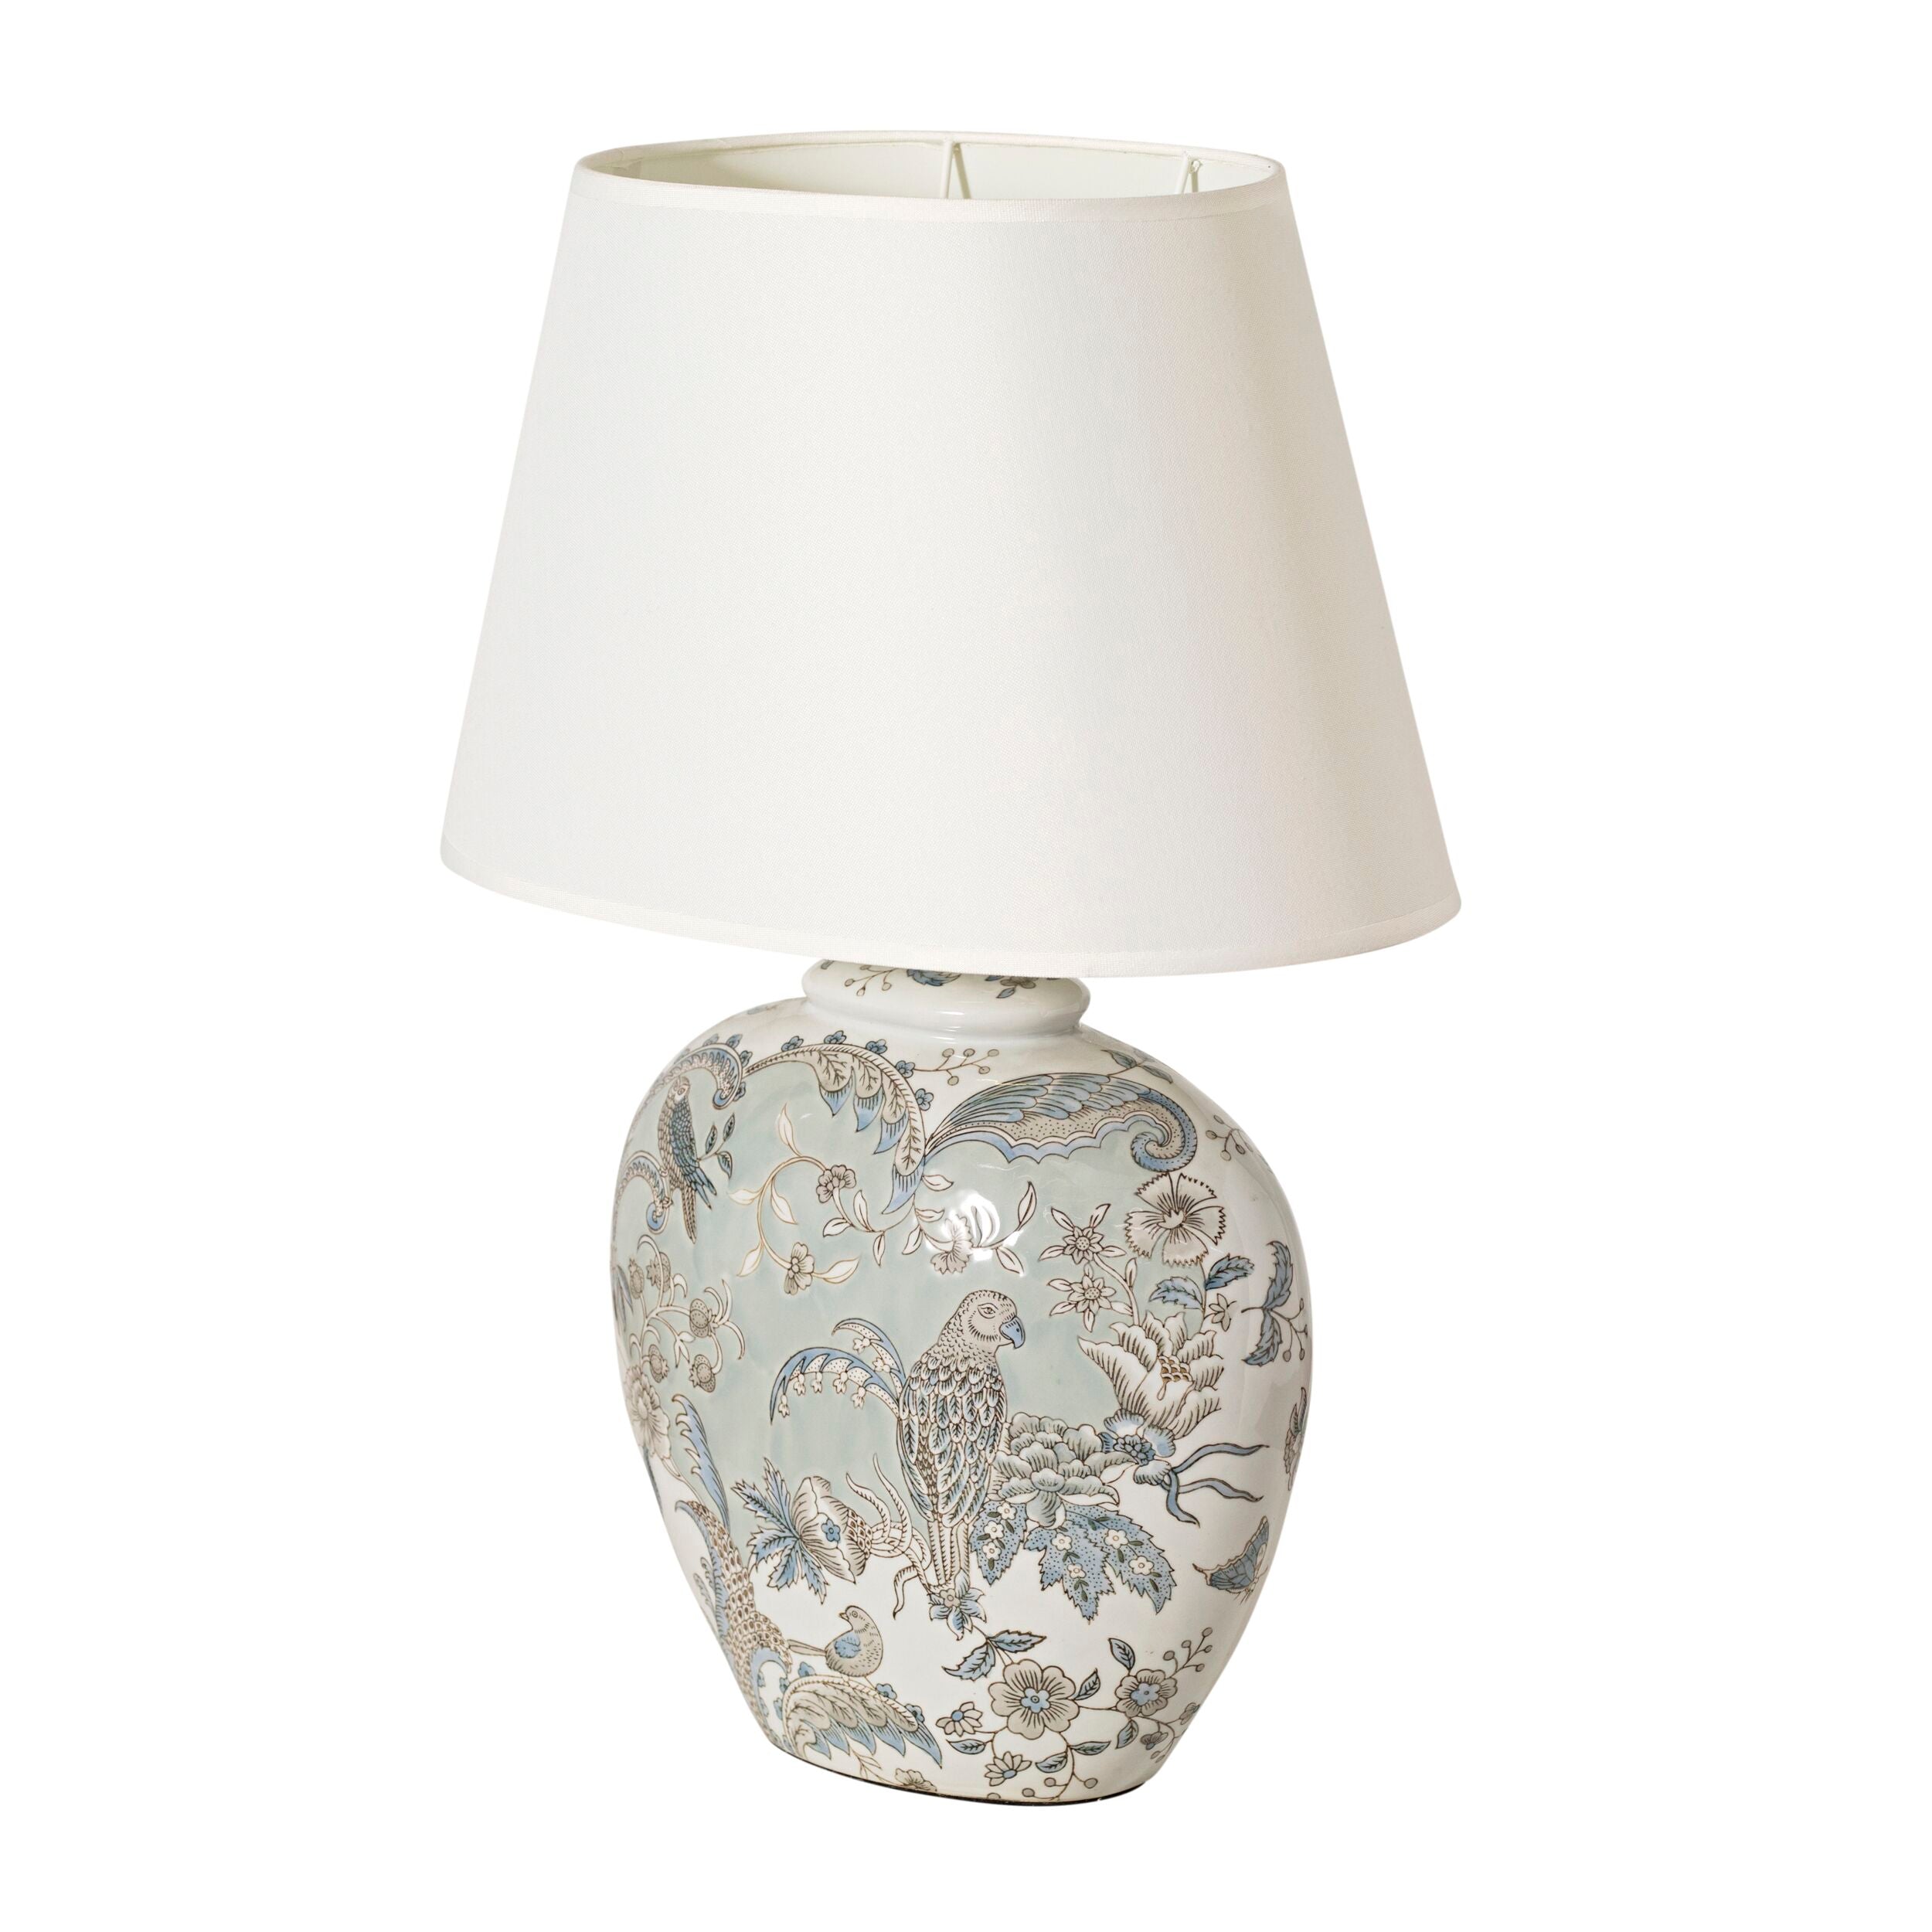 Pale Blue Birds In The Sky Table Lamp 65cm